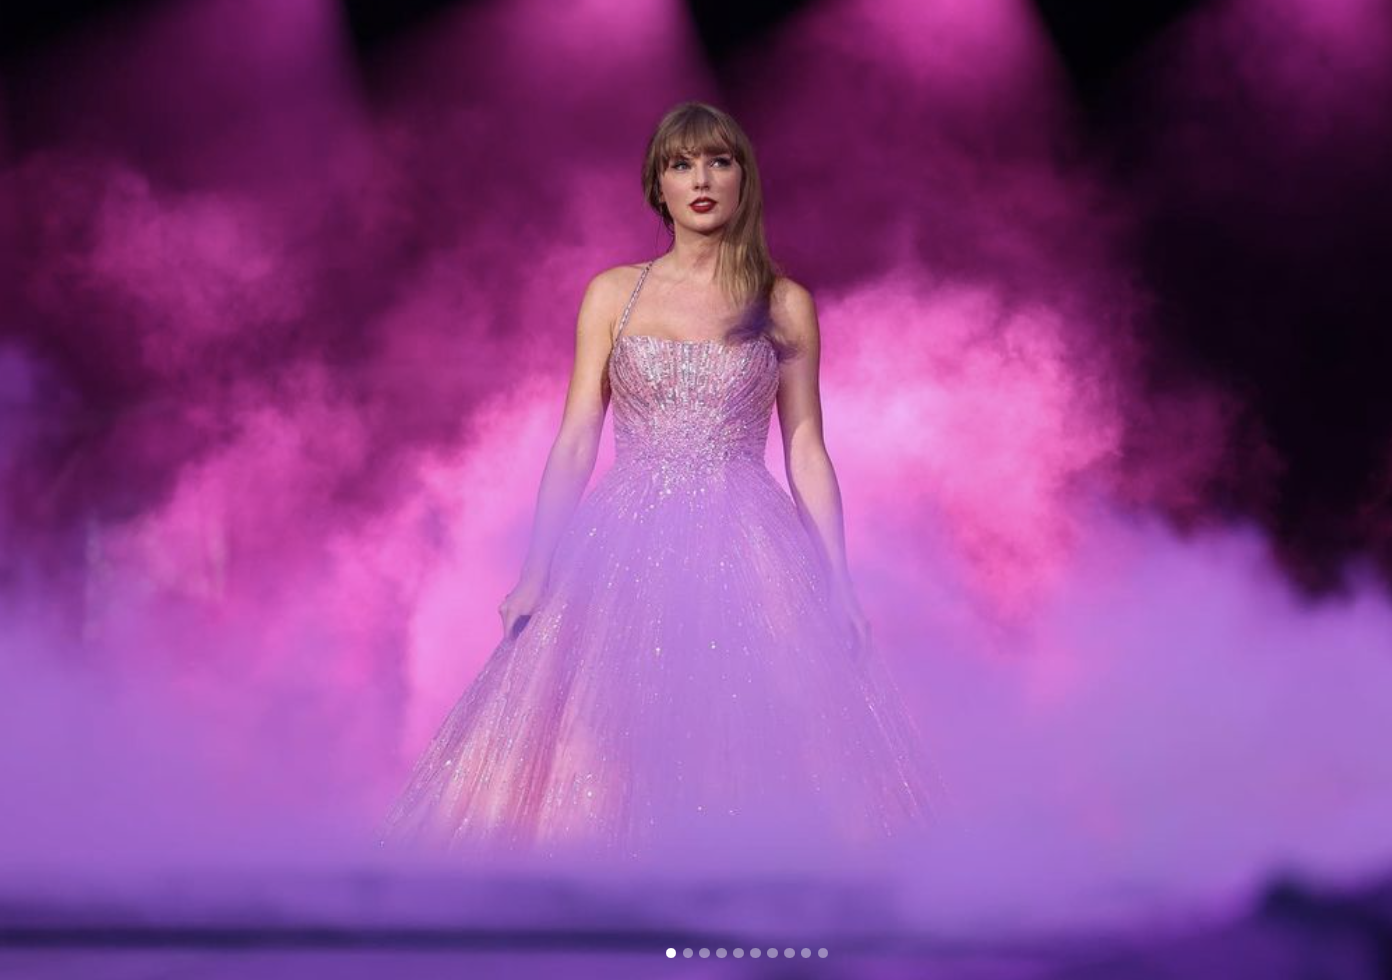 Taylor Swift releases Speak Now (Taylor's Version)